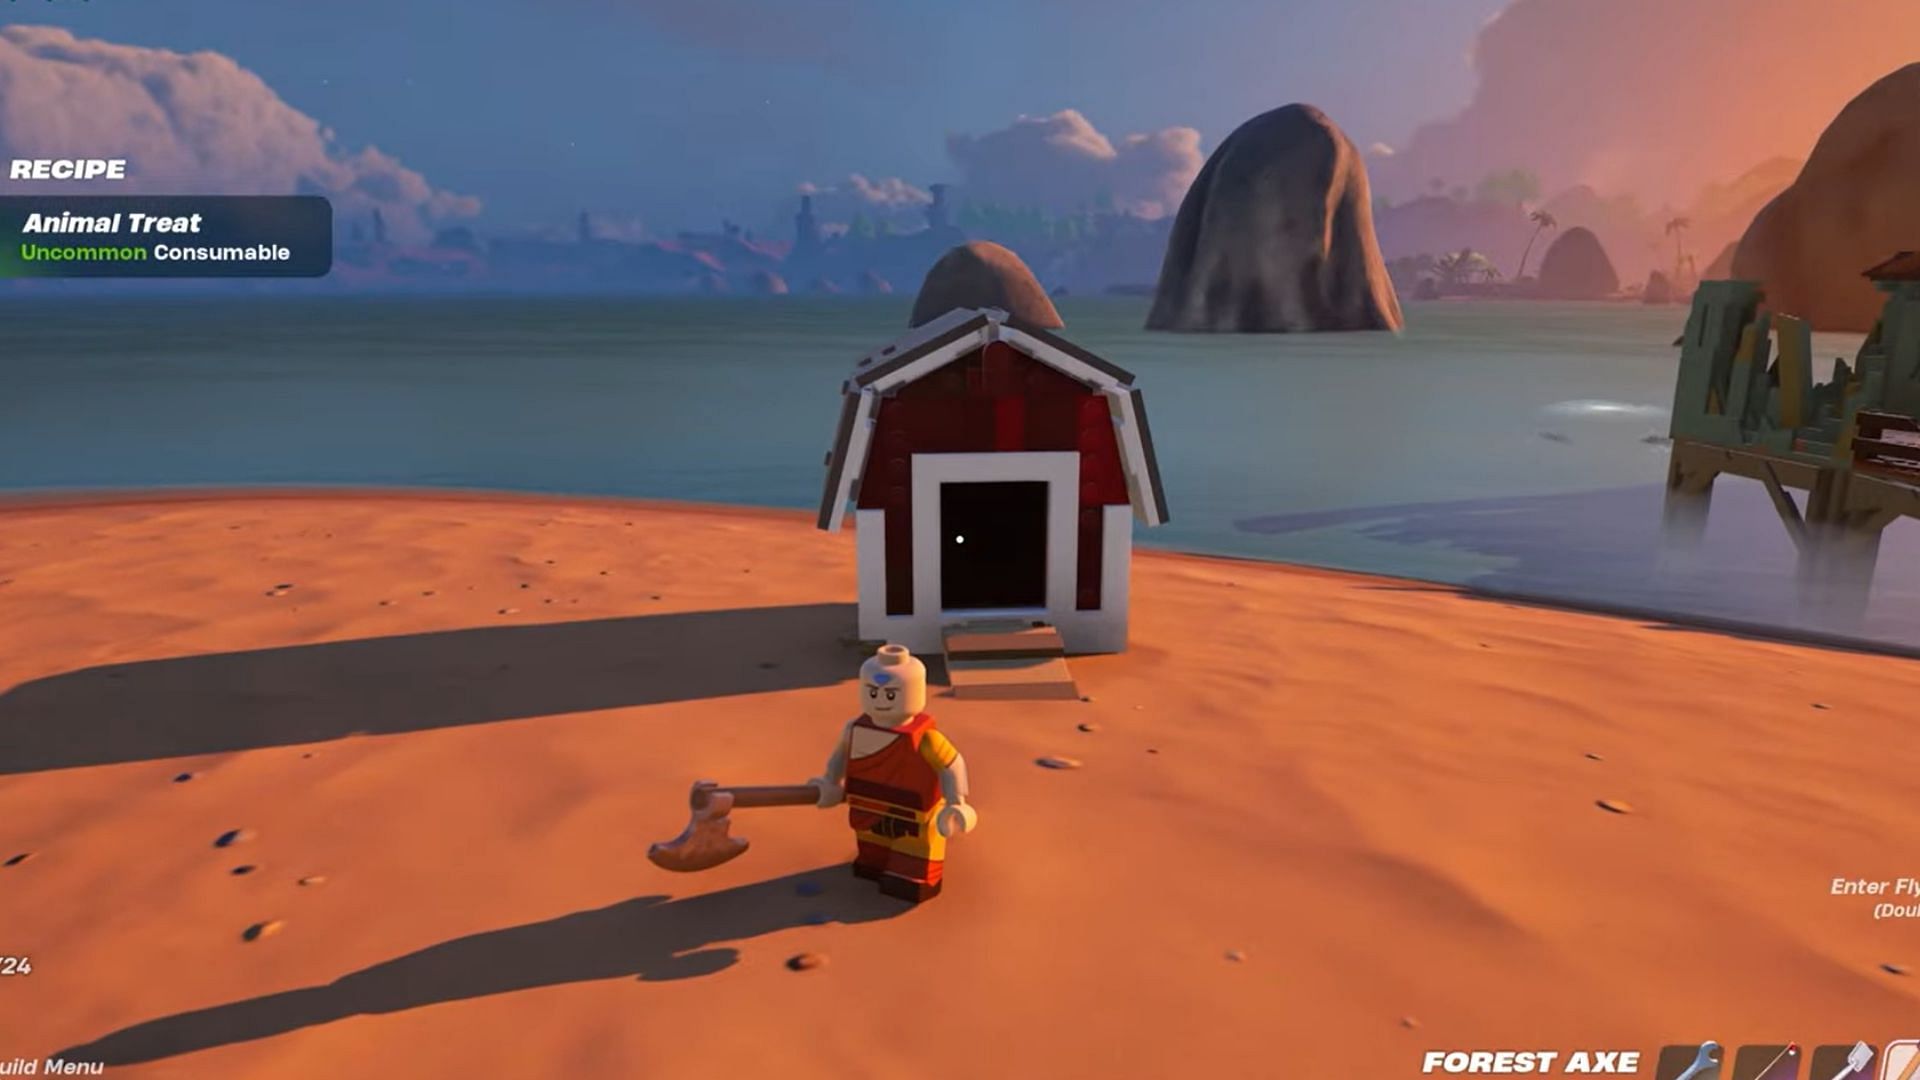 Building a Barn in your village unlocks the recipe for the Animal Treat (Image via Perfect Score on YouTube and Epic Games)